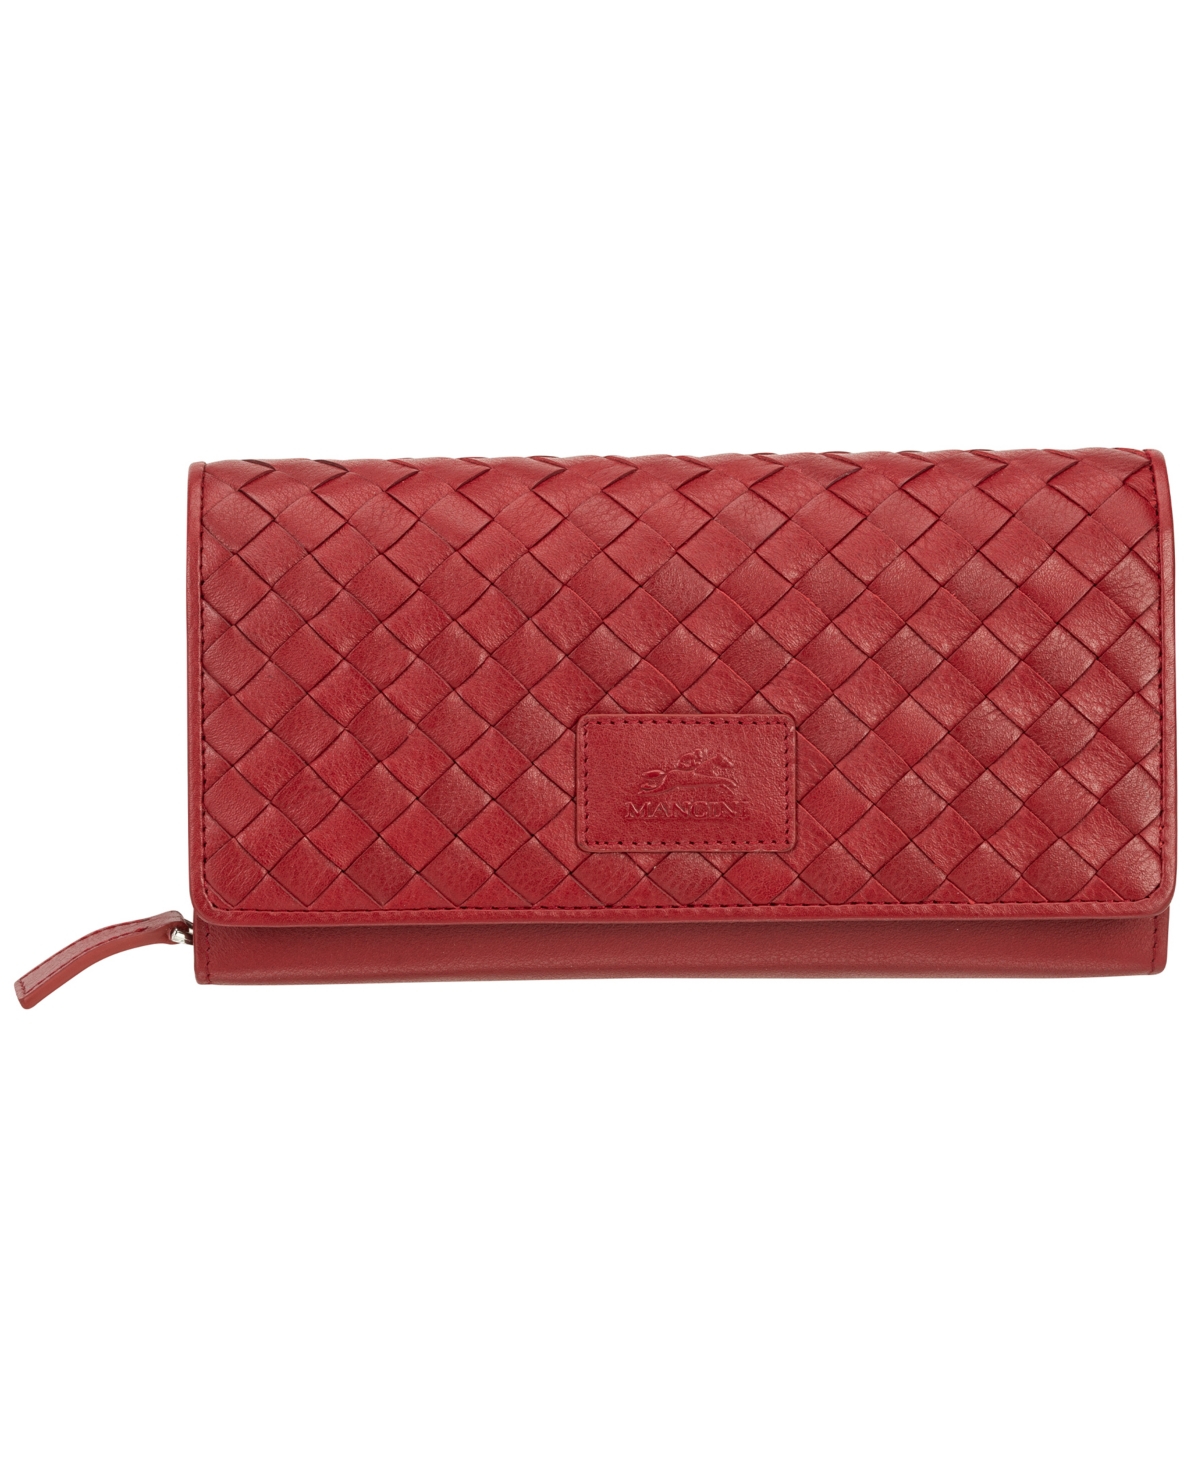 Women's Basket Weave Collection Rfid Secure Clutch Wallet - Red